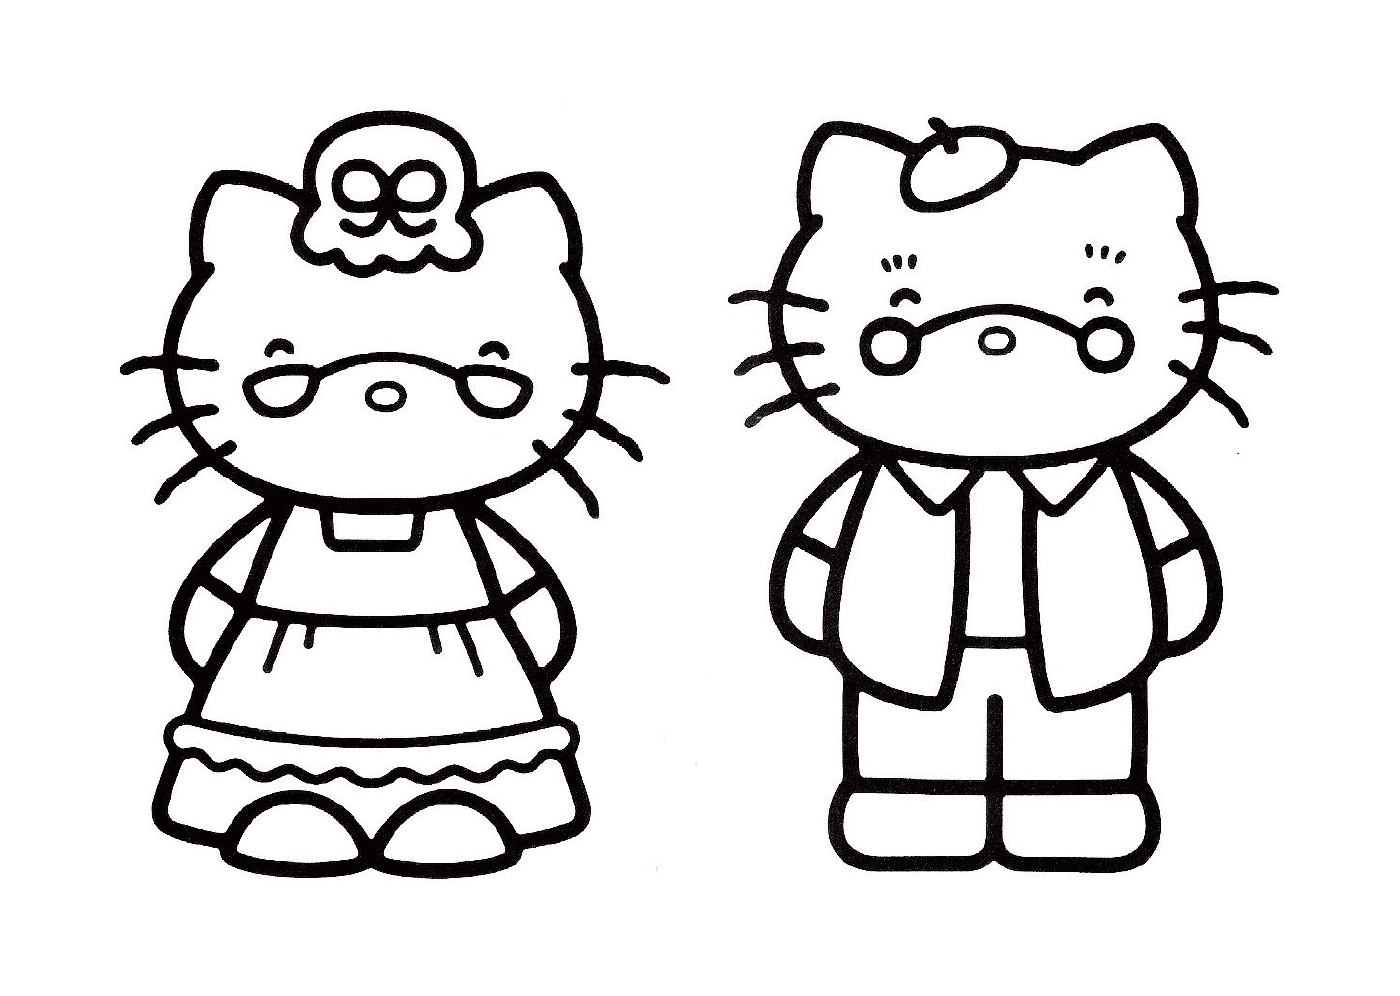  Two Hello Kitty characters 